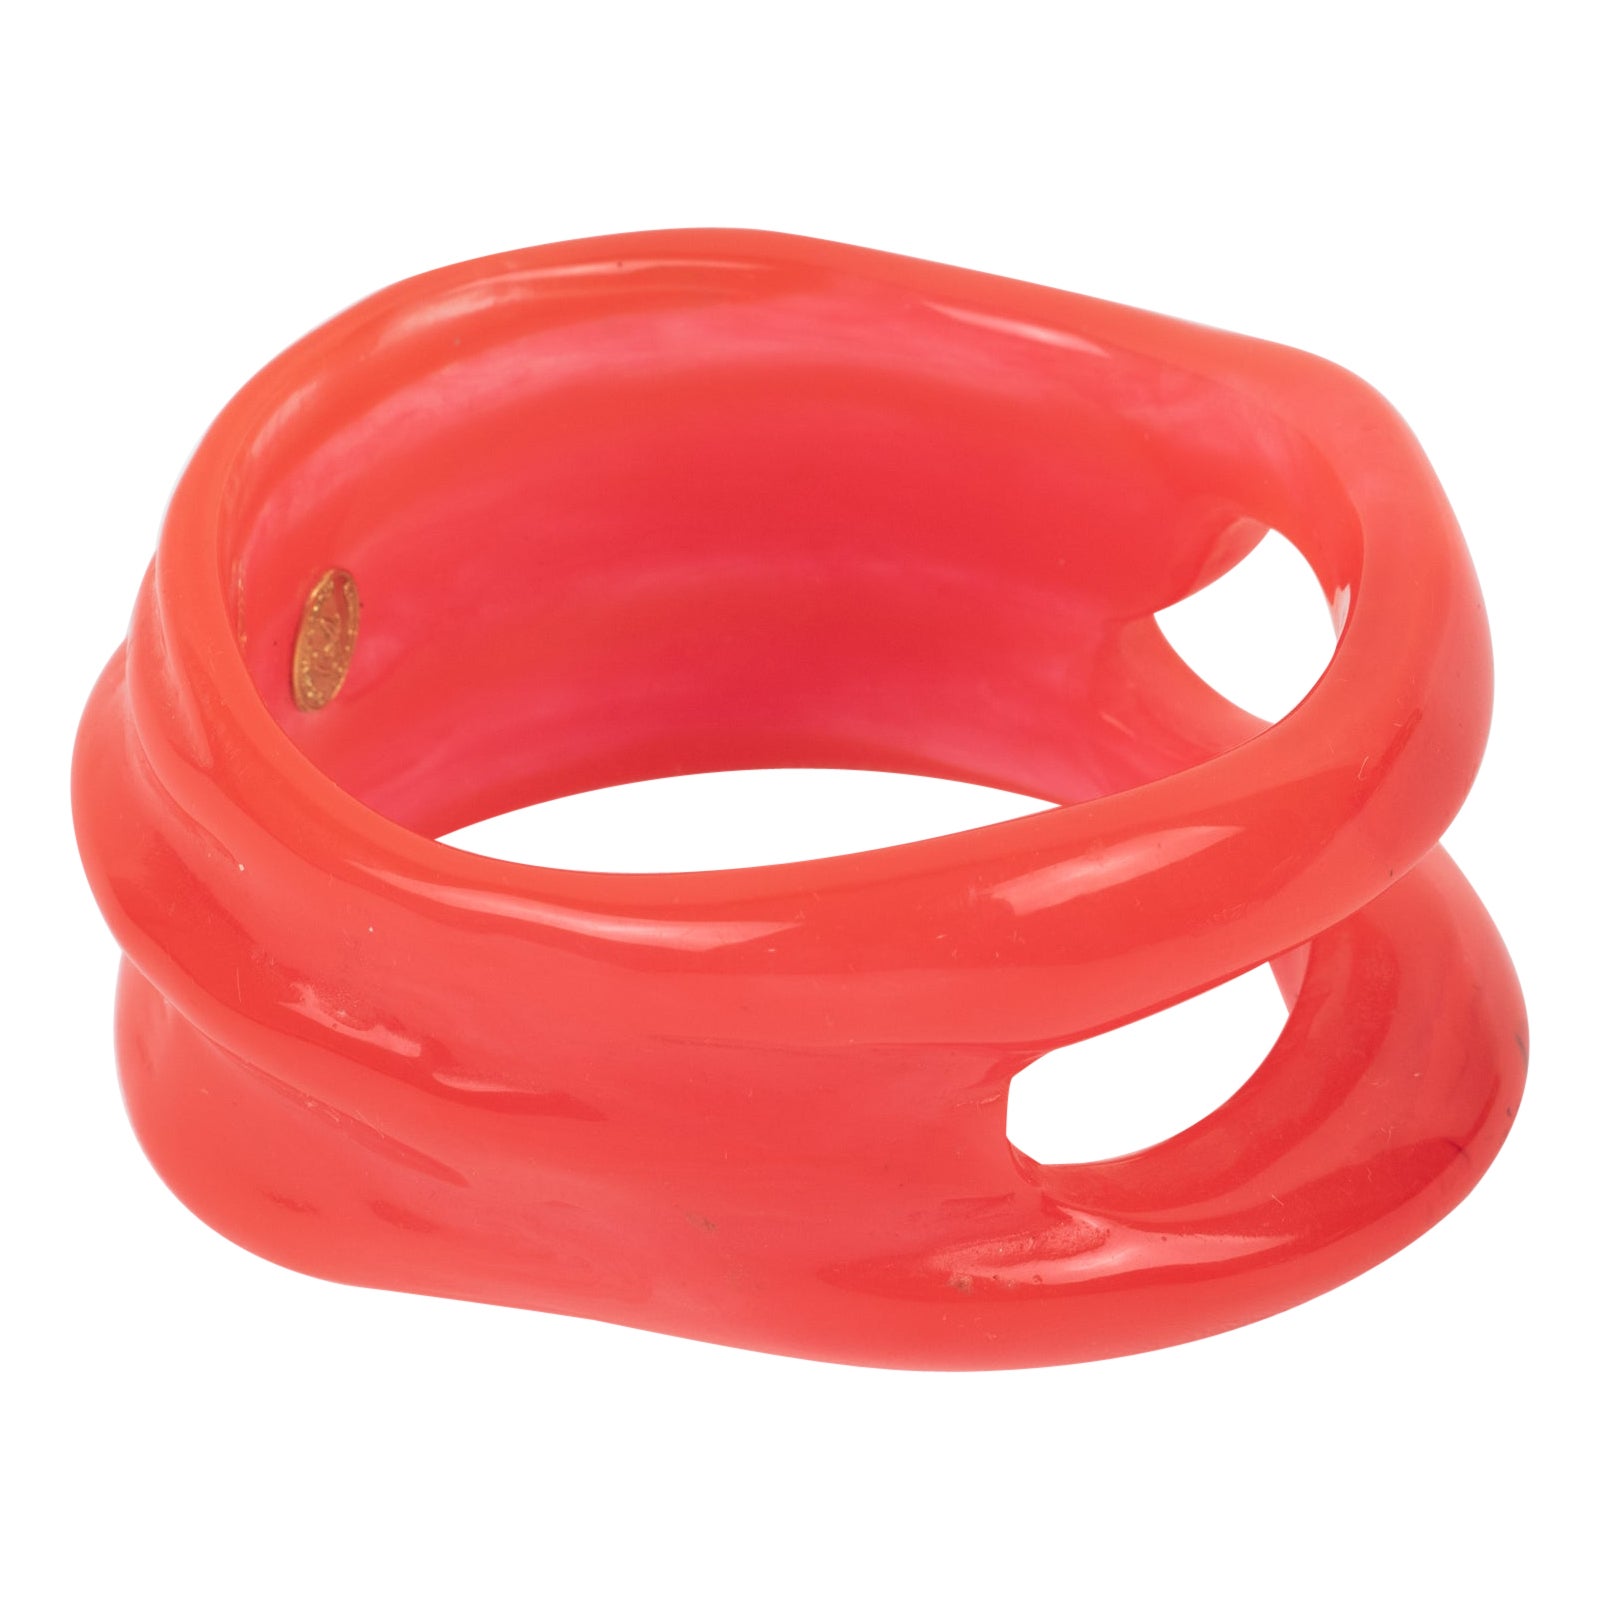 Christian Lacroix Space Age Pink-Red Resin Lucite Bangle Bracelet For Sale